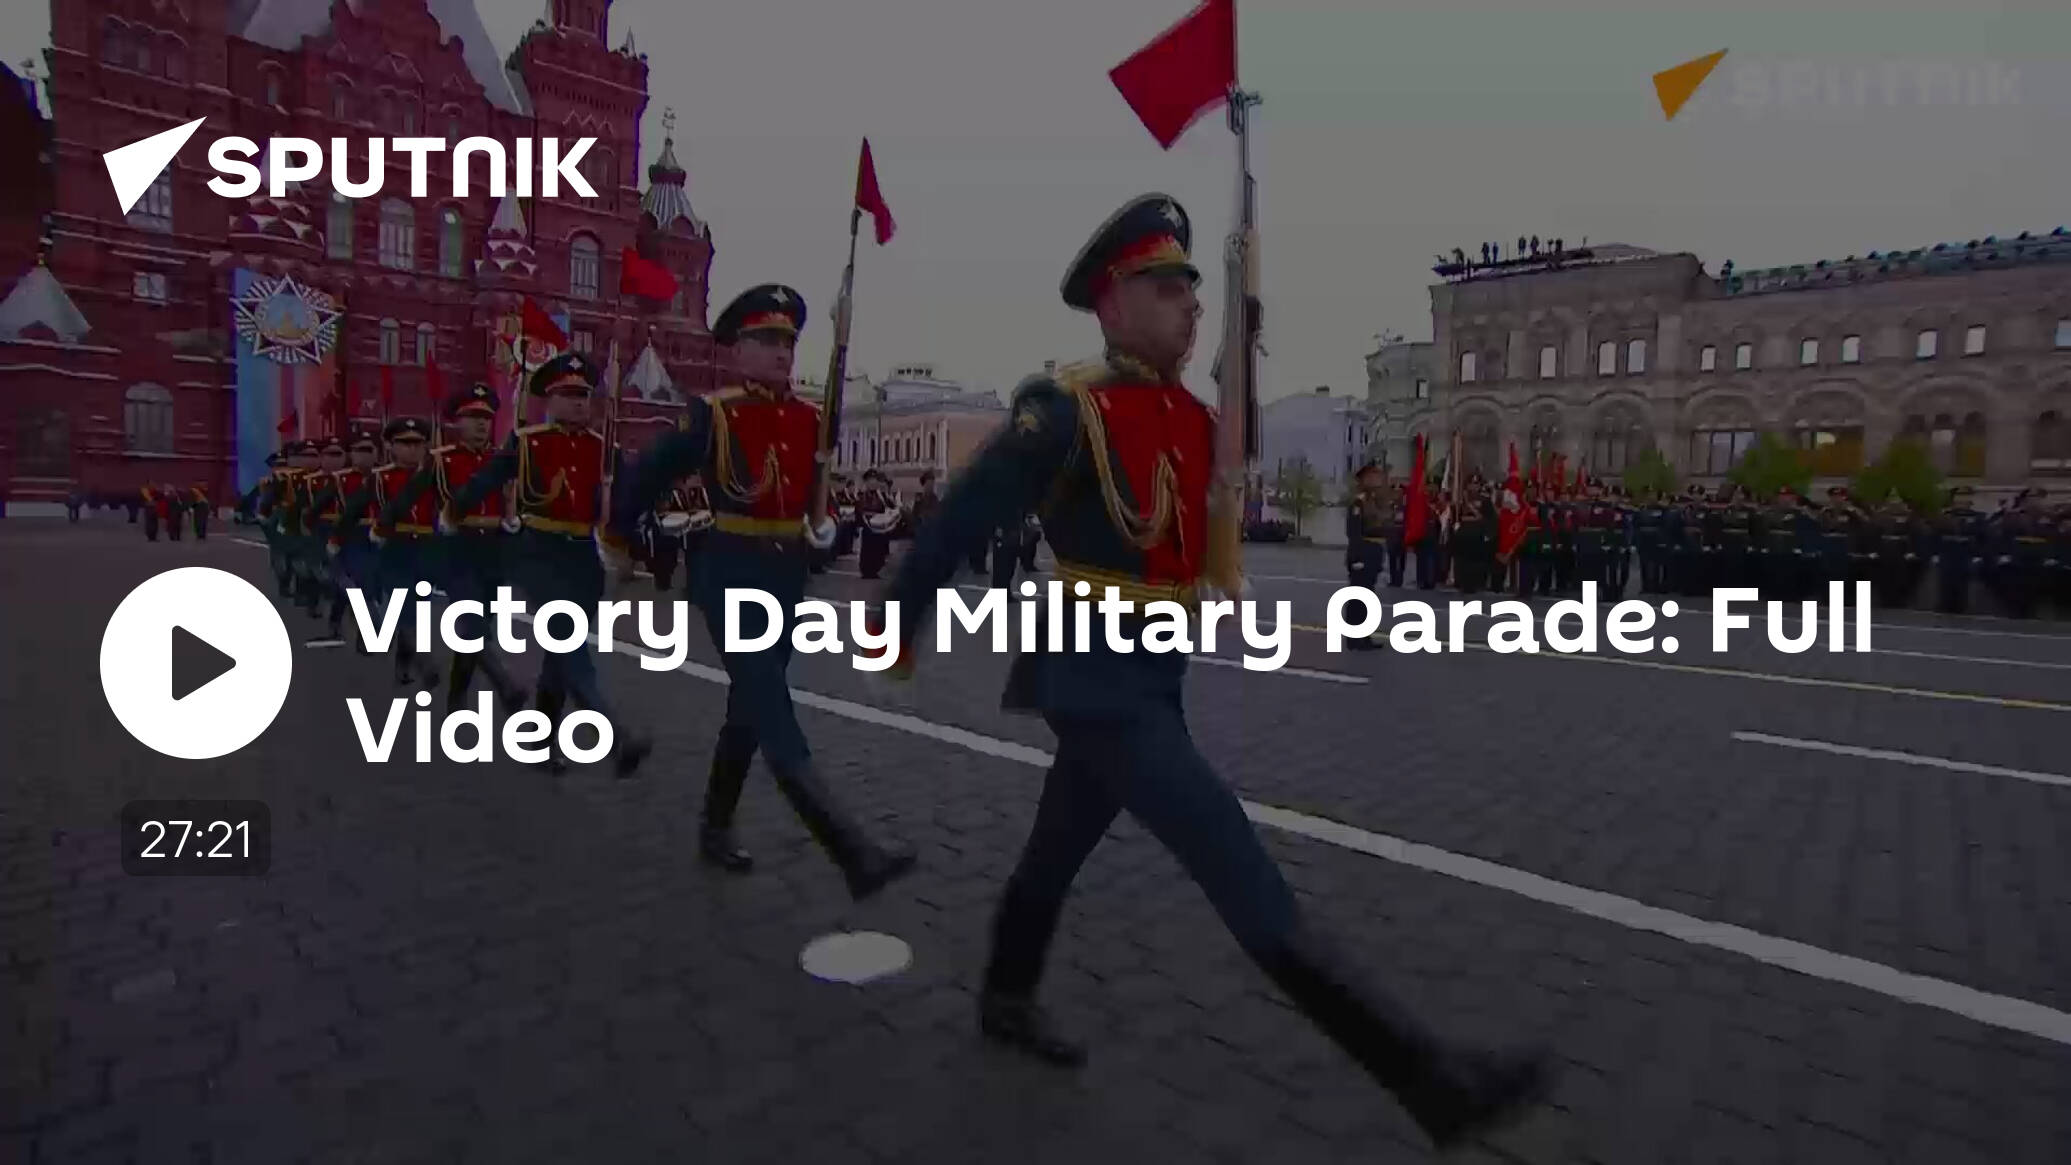 Victory Day Military Parade: Full Video